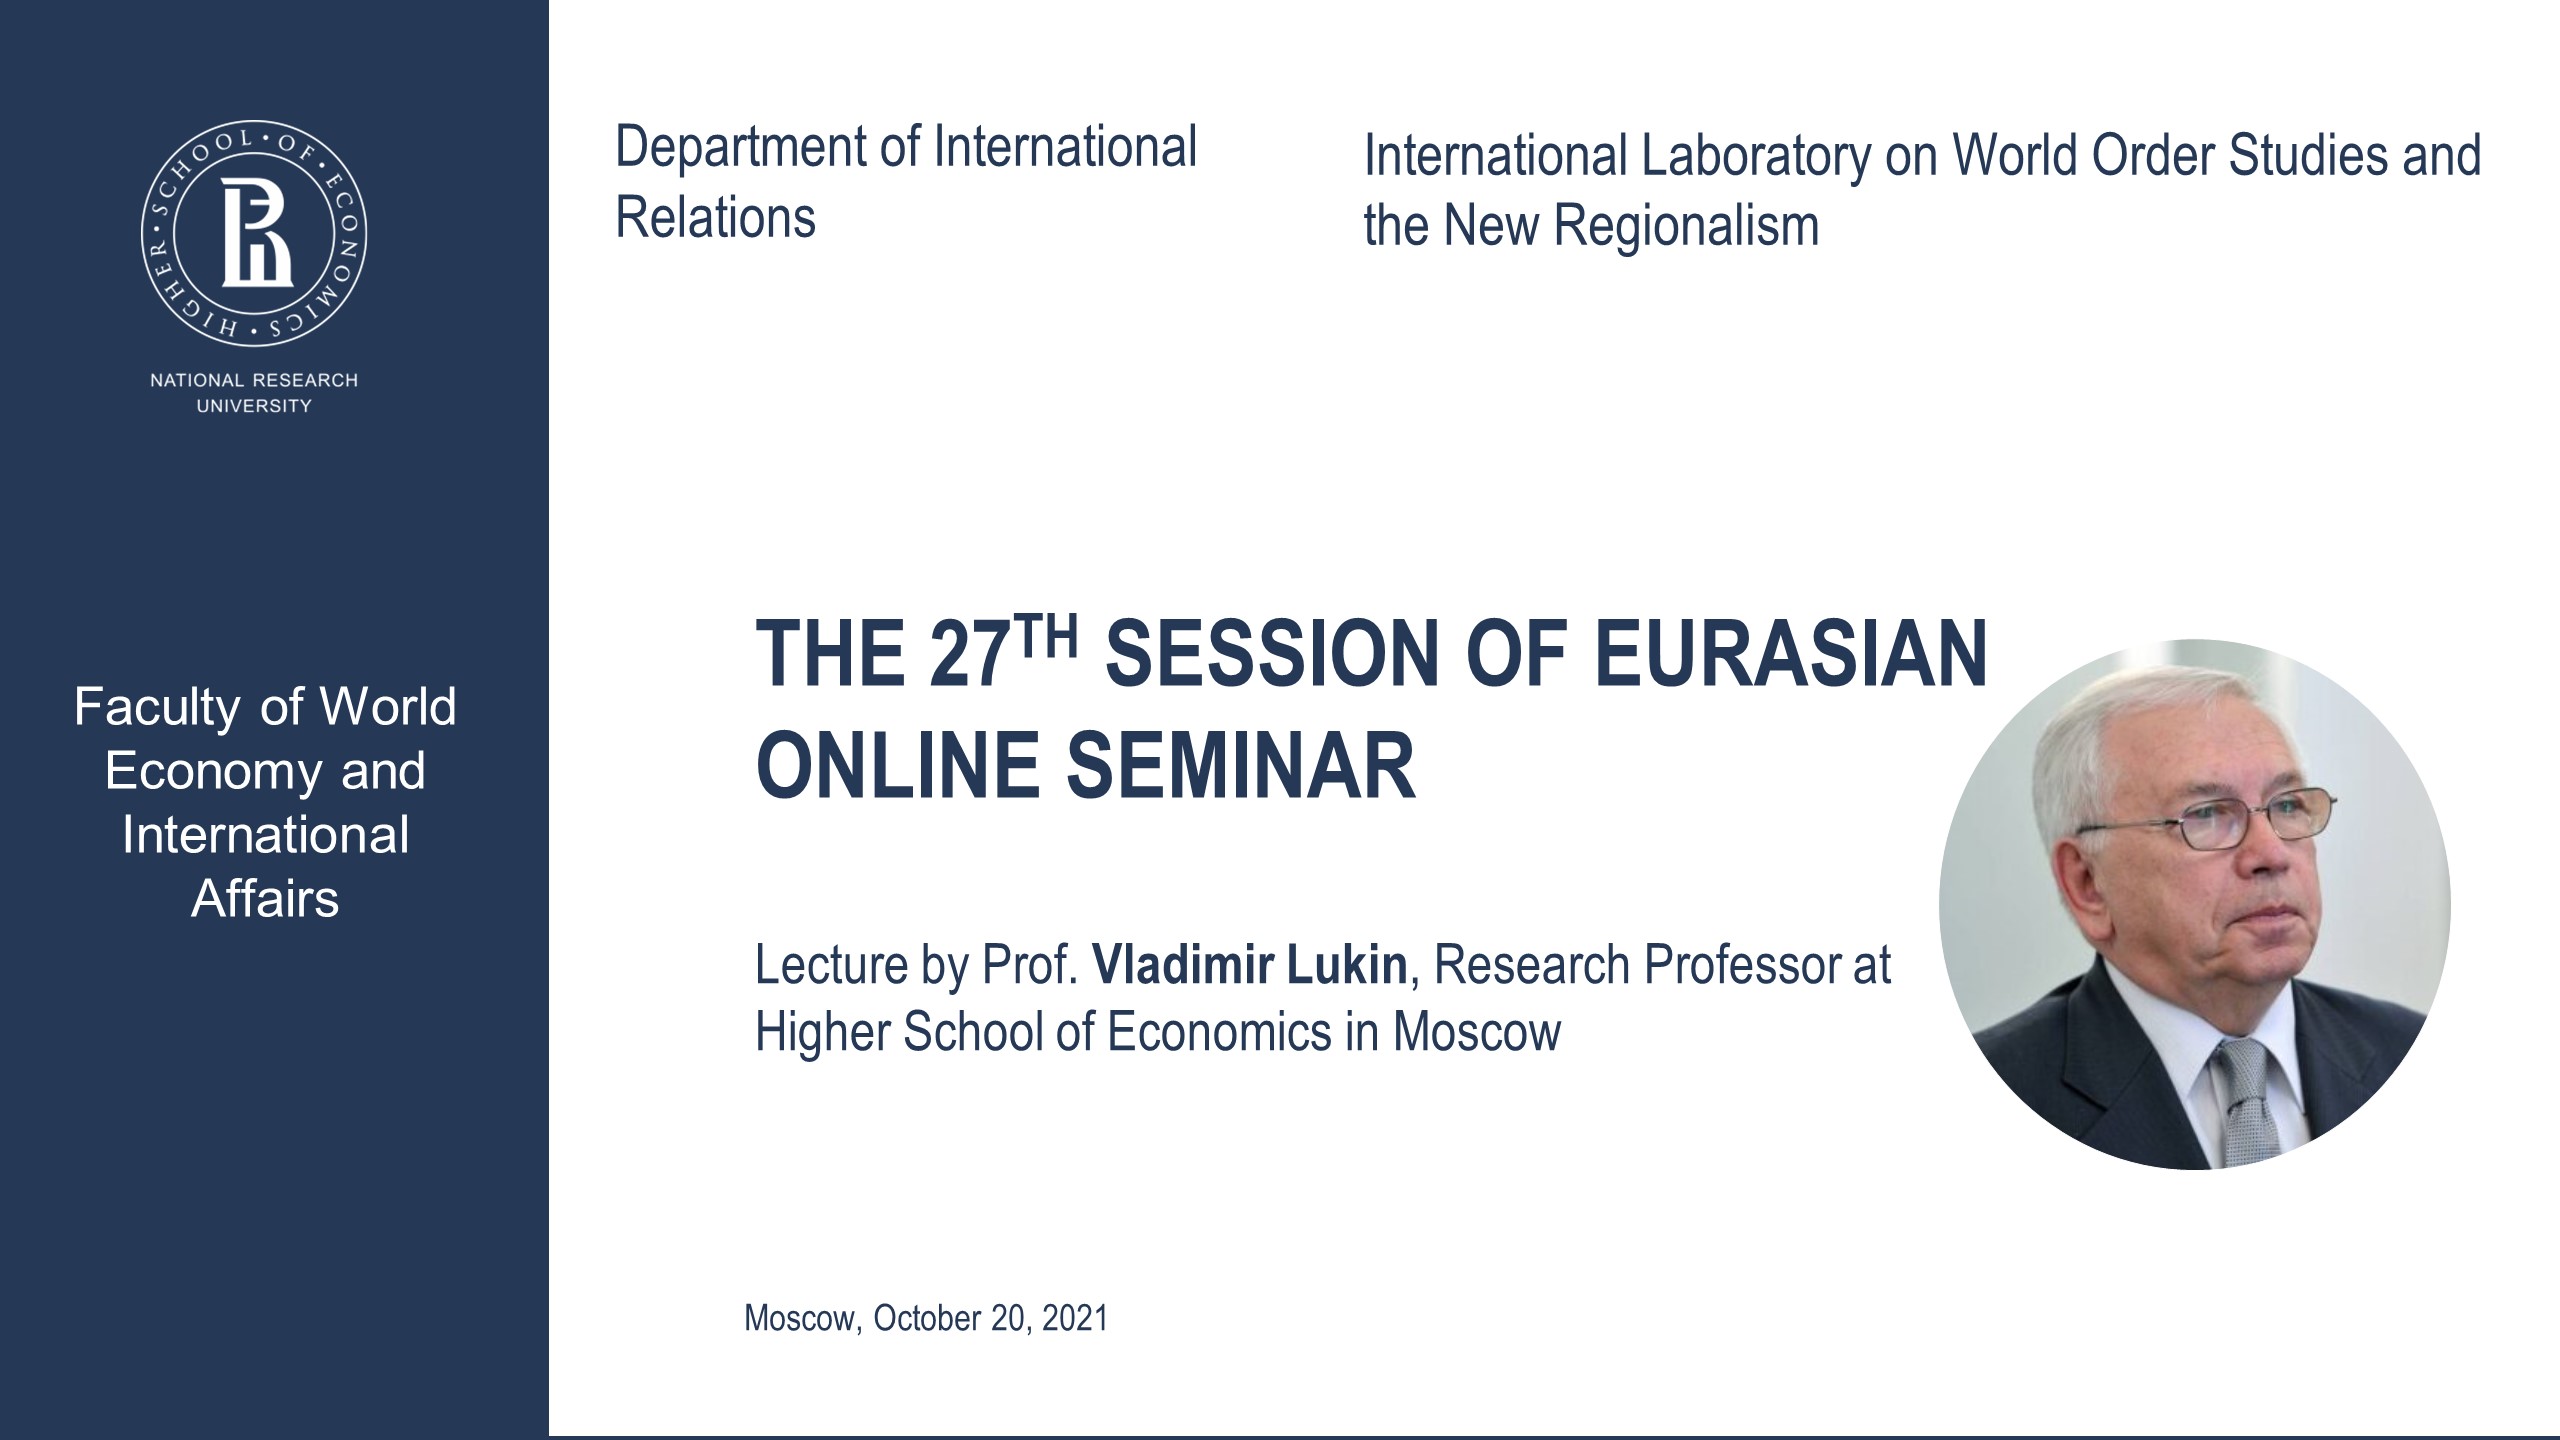 The 27th Session of Eurasian Online Seminar with Vladimir Lukin